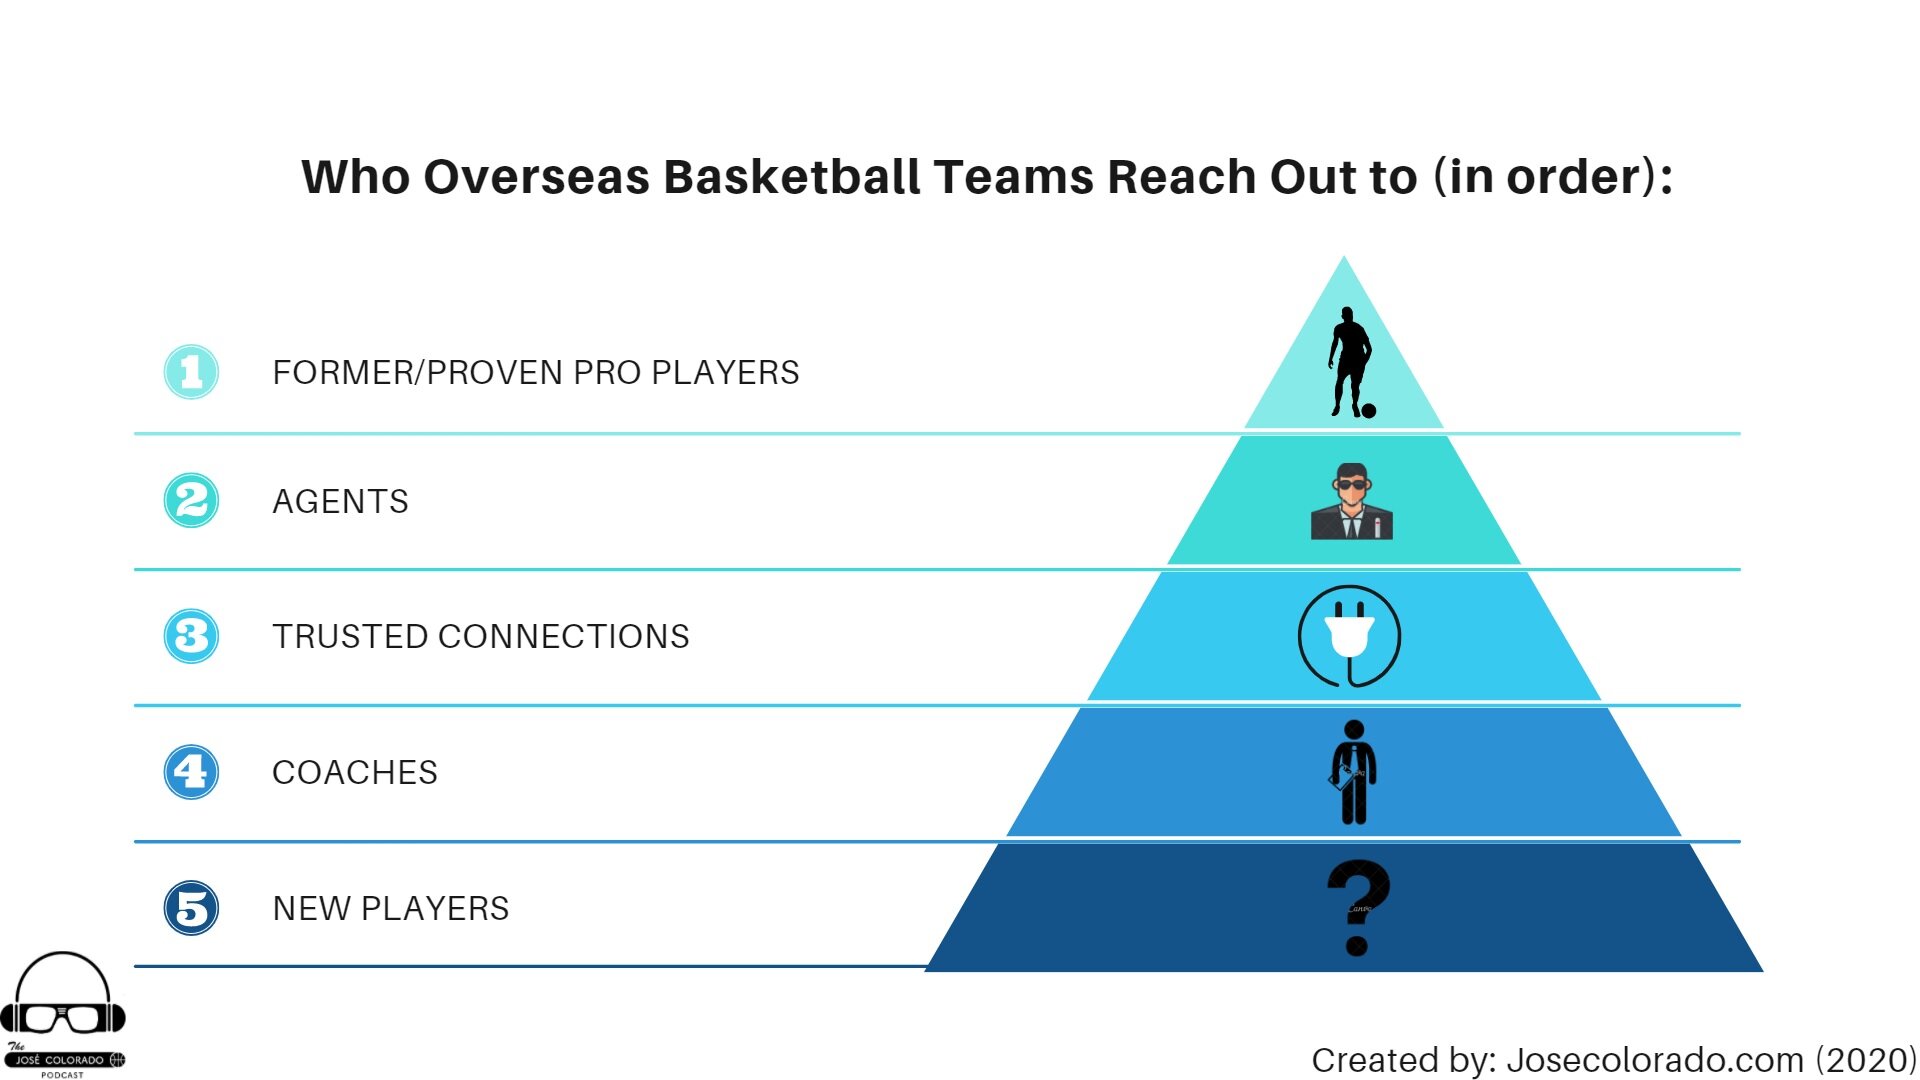 Overseas basketball players must know the order overseas basketball teams contact players.